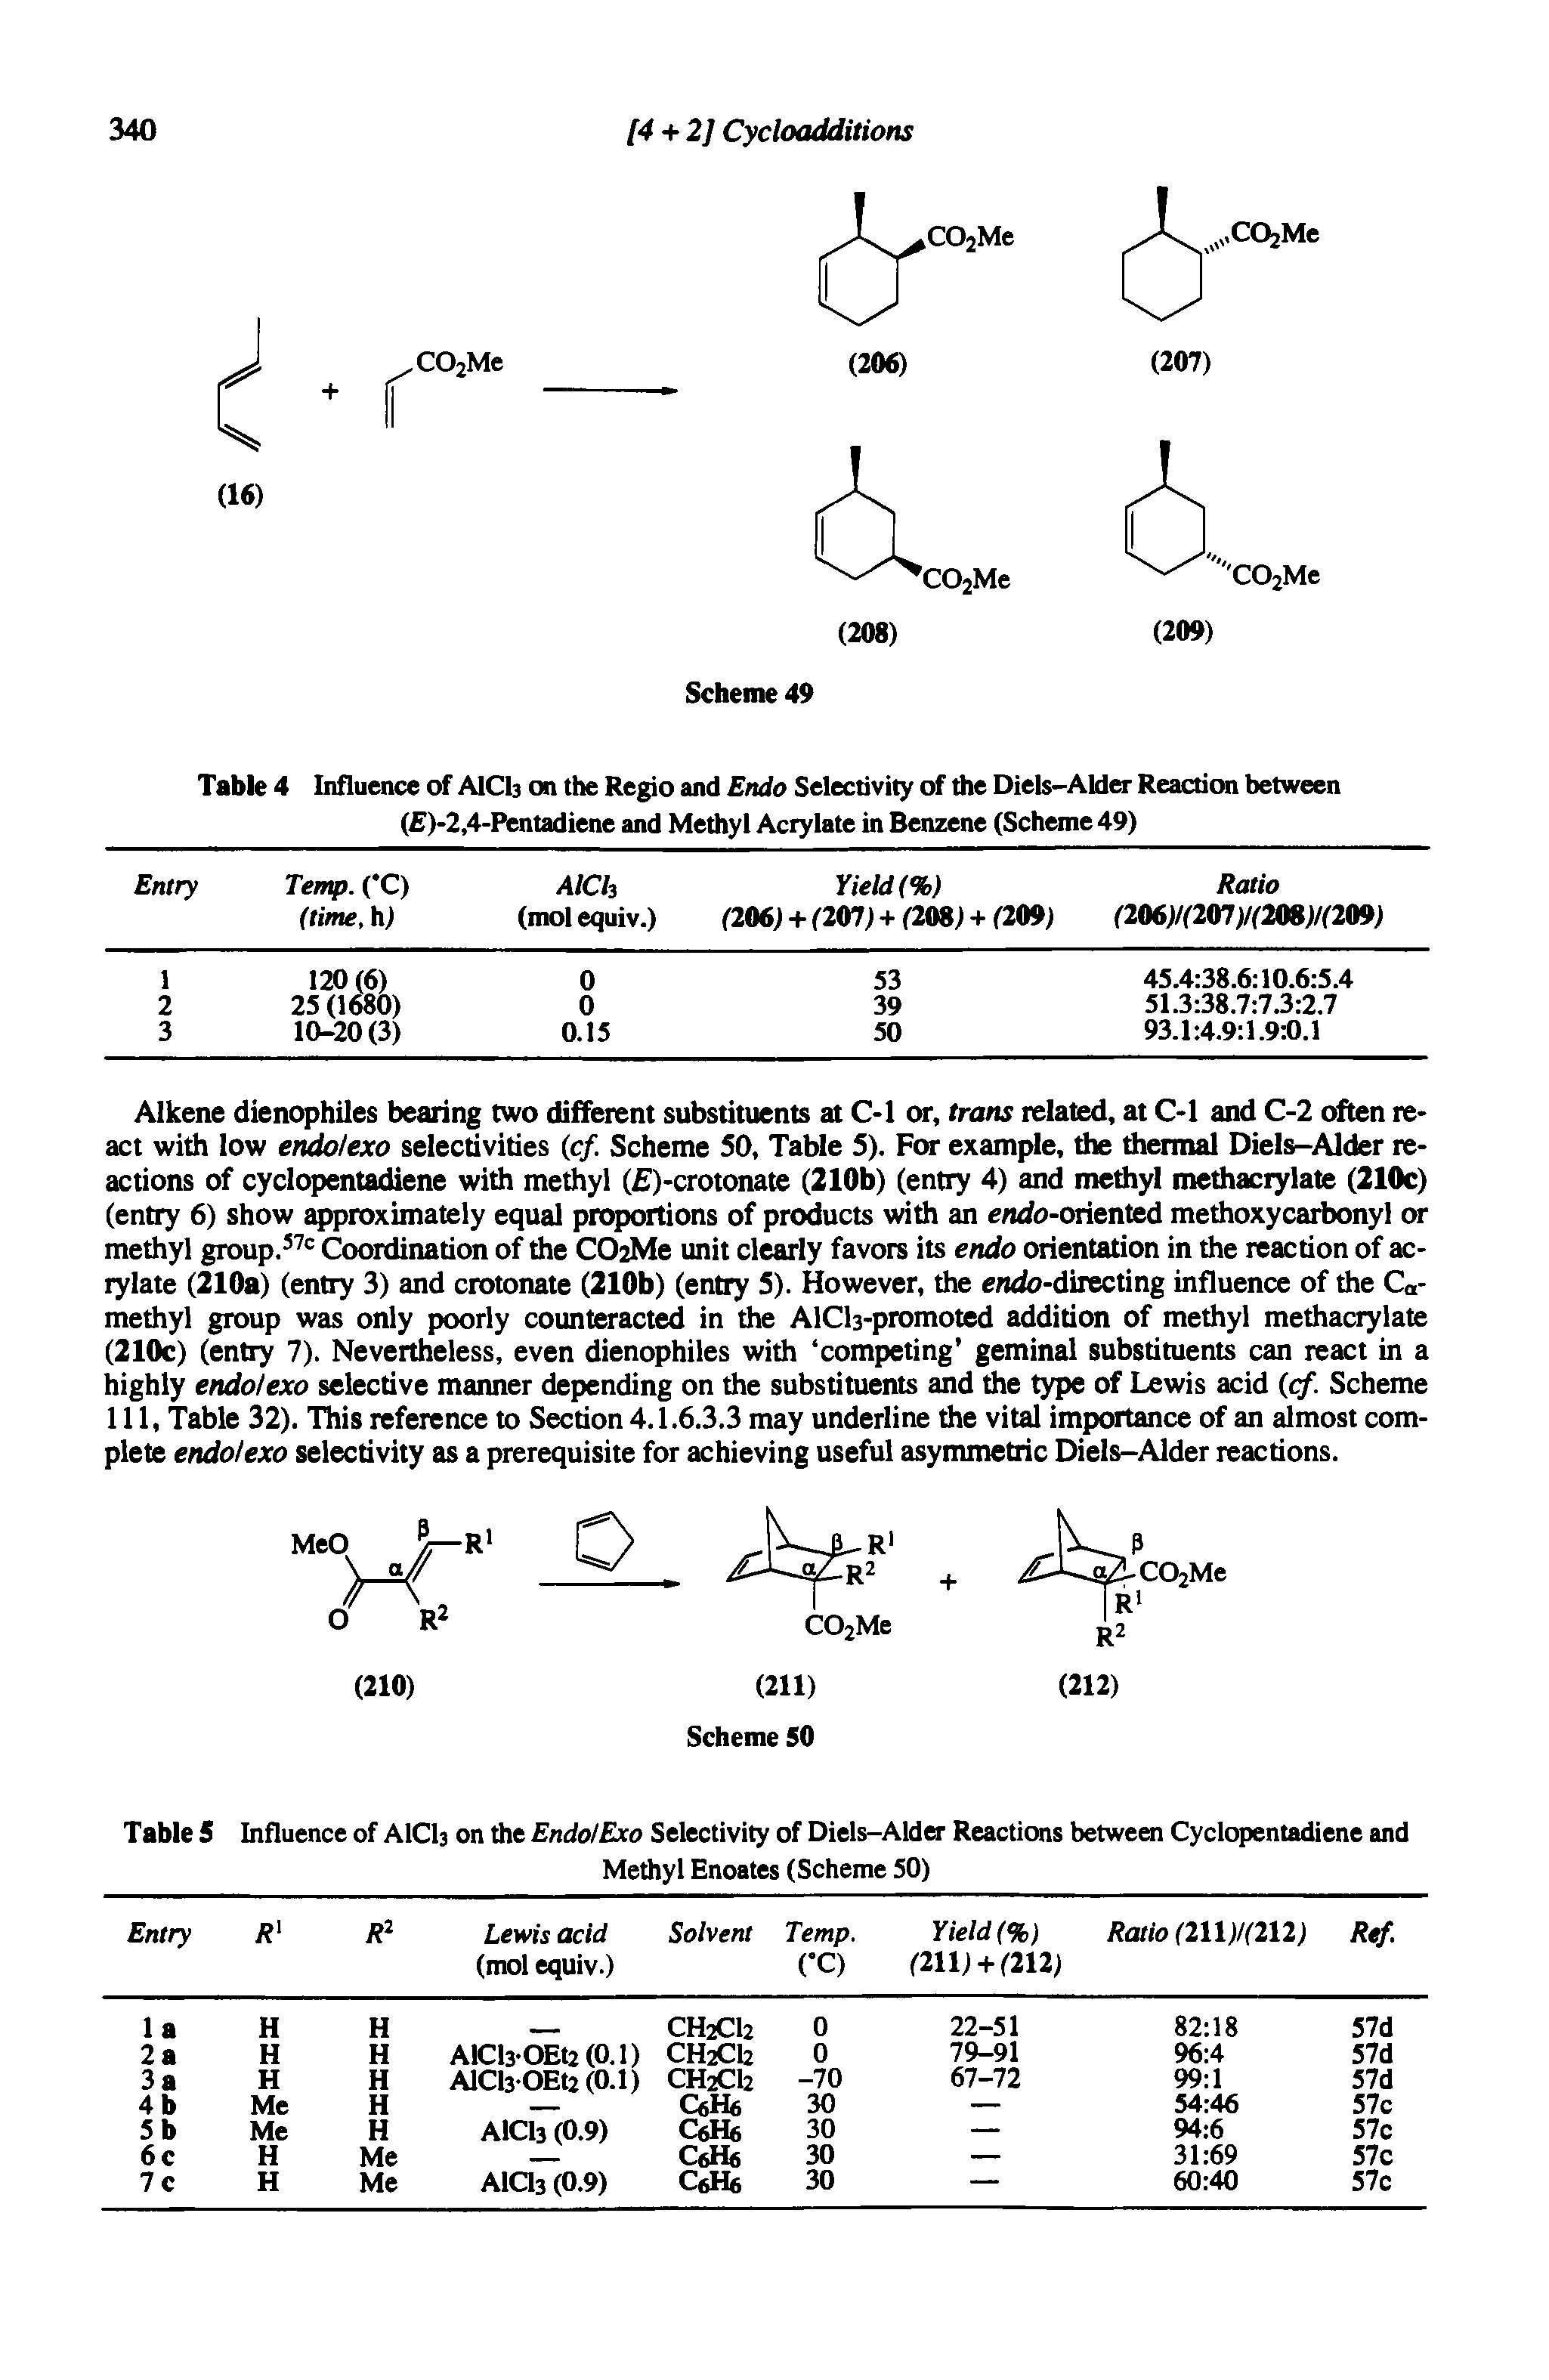 Table 4 Influence of AlCb on the Regio and Endo Selectivity of the Diels-Alder Reaction between ( )-2,4-Pentadiene and Methyl Acrylate in Benzene (Scheme 49)...